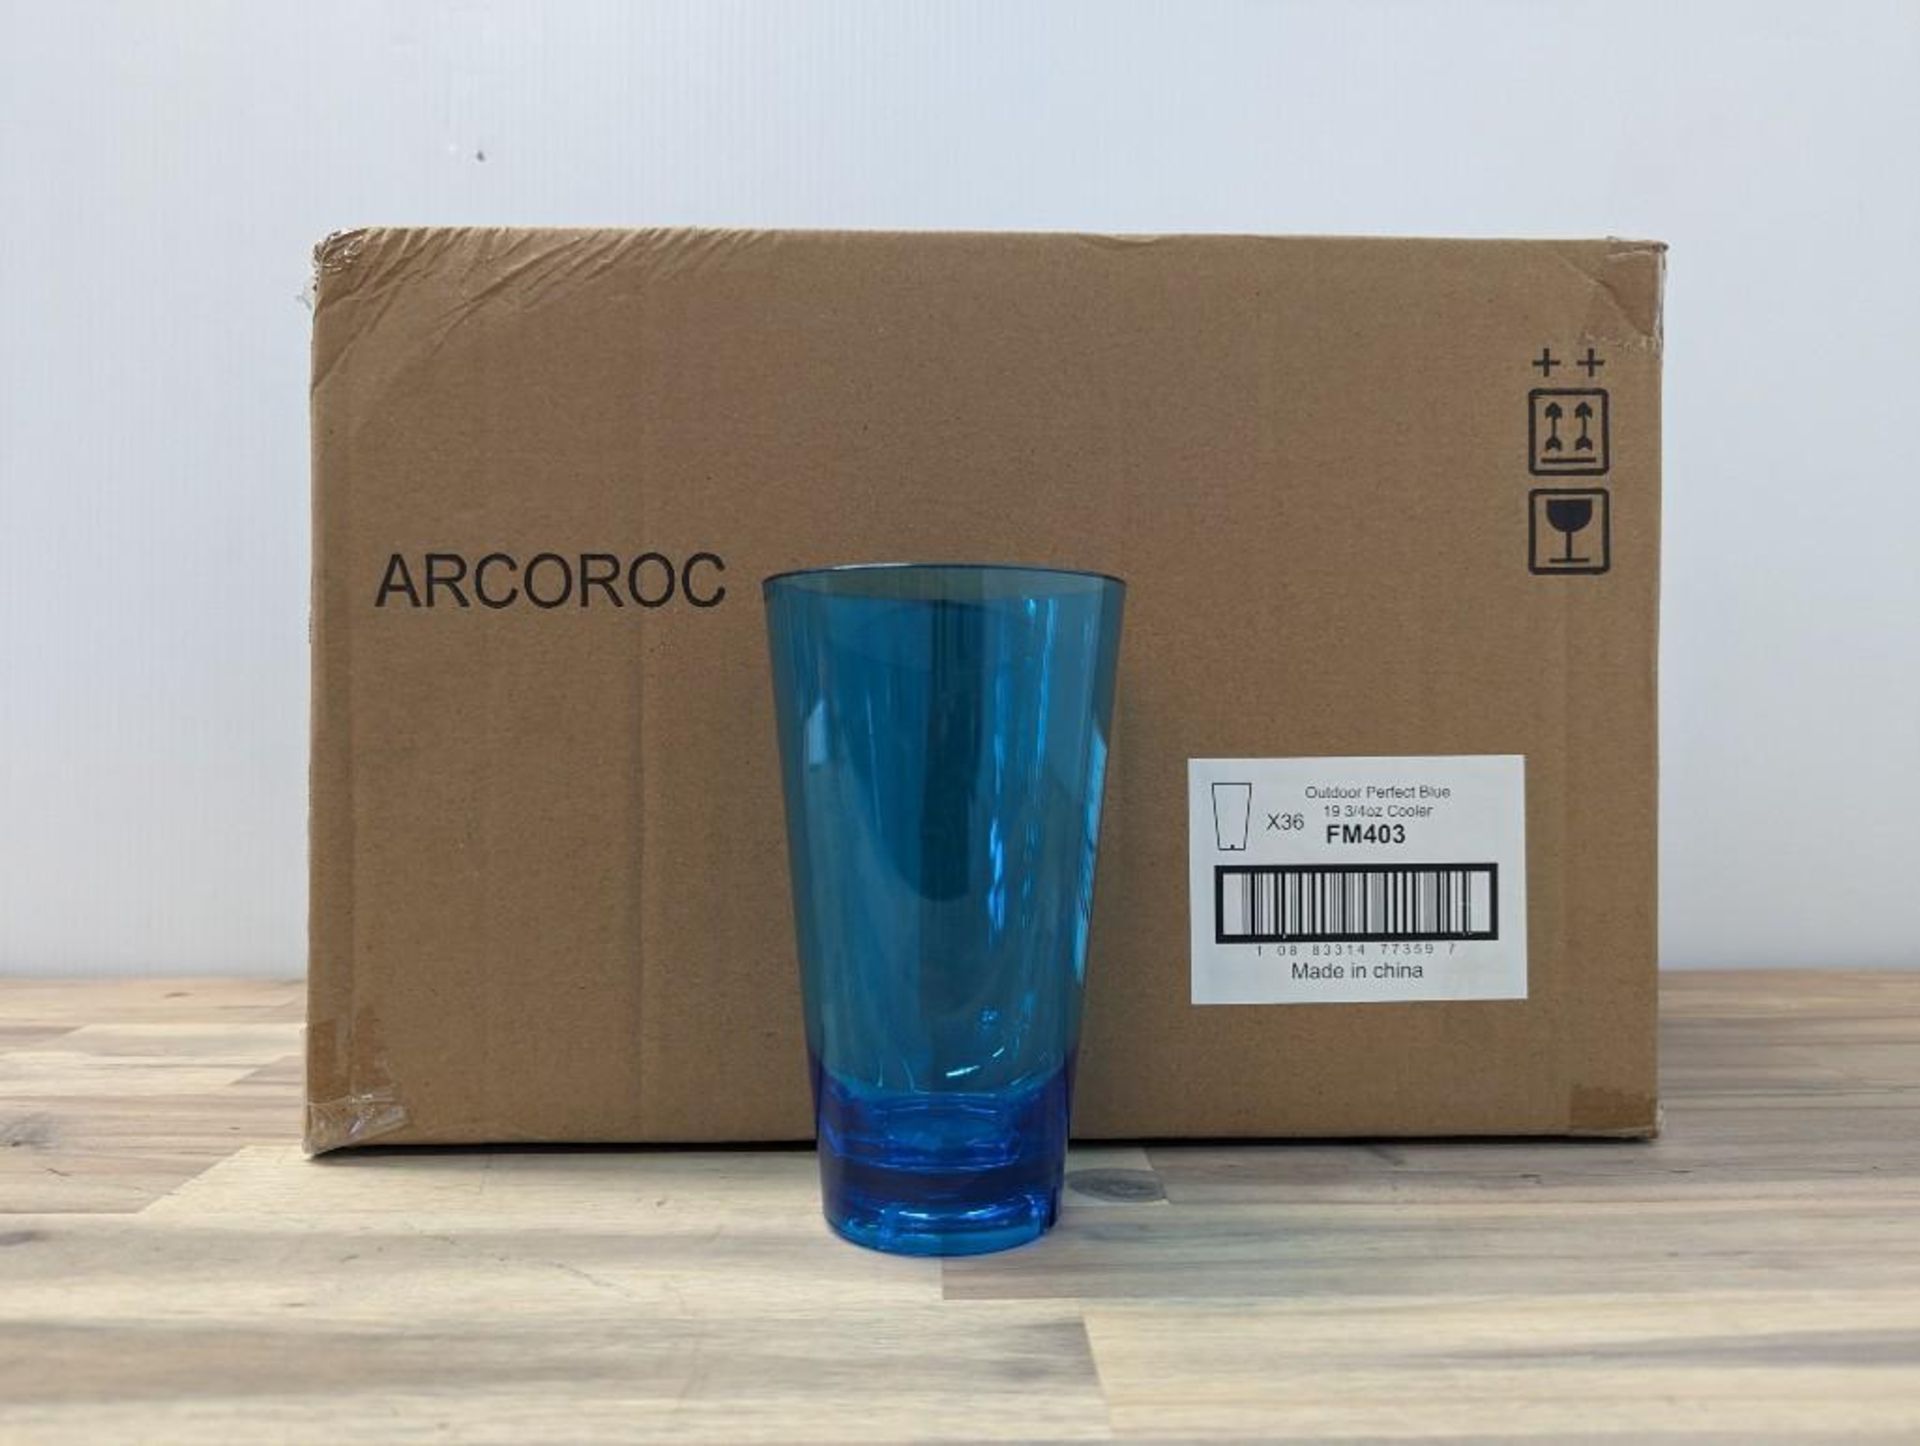 19.75OZ OUTDOOR PERFECT BLUE COOLER GLASSES, ARCOROC FM403 - LOT OF 36 - NEW - Image 2 of 10